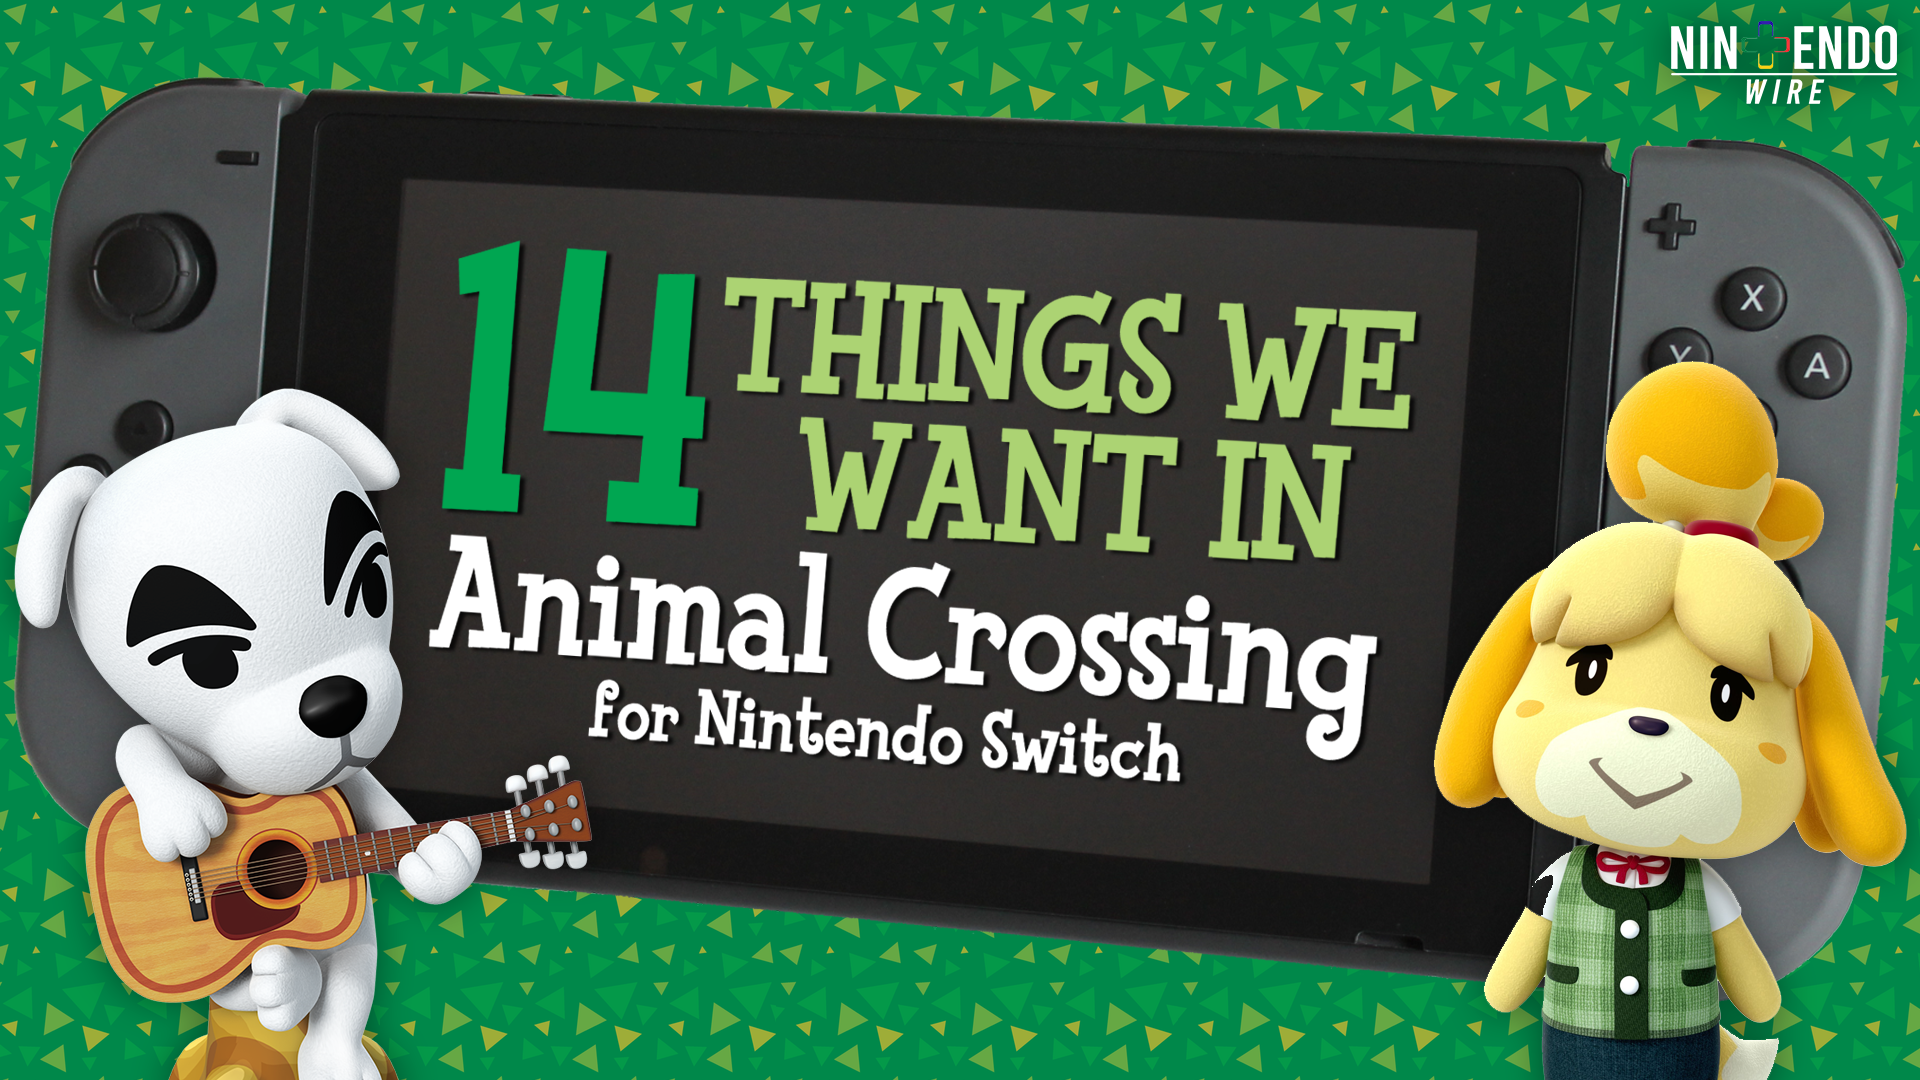 14 things we want in Animal Crossing for Nintendo Switch